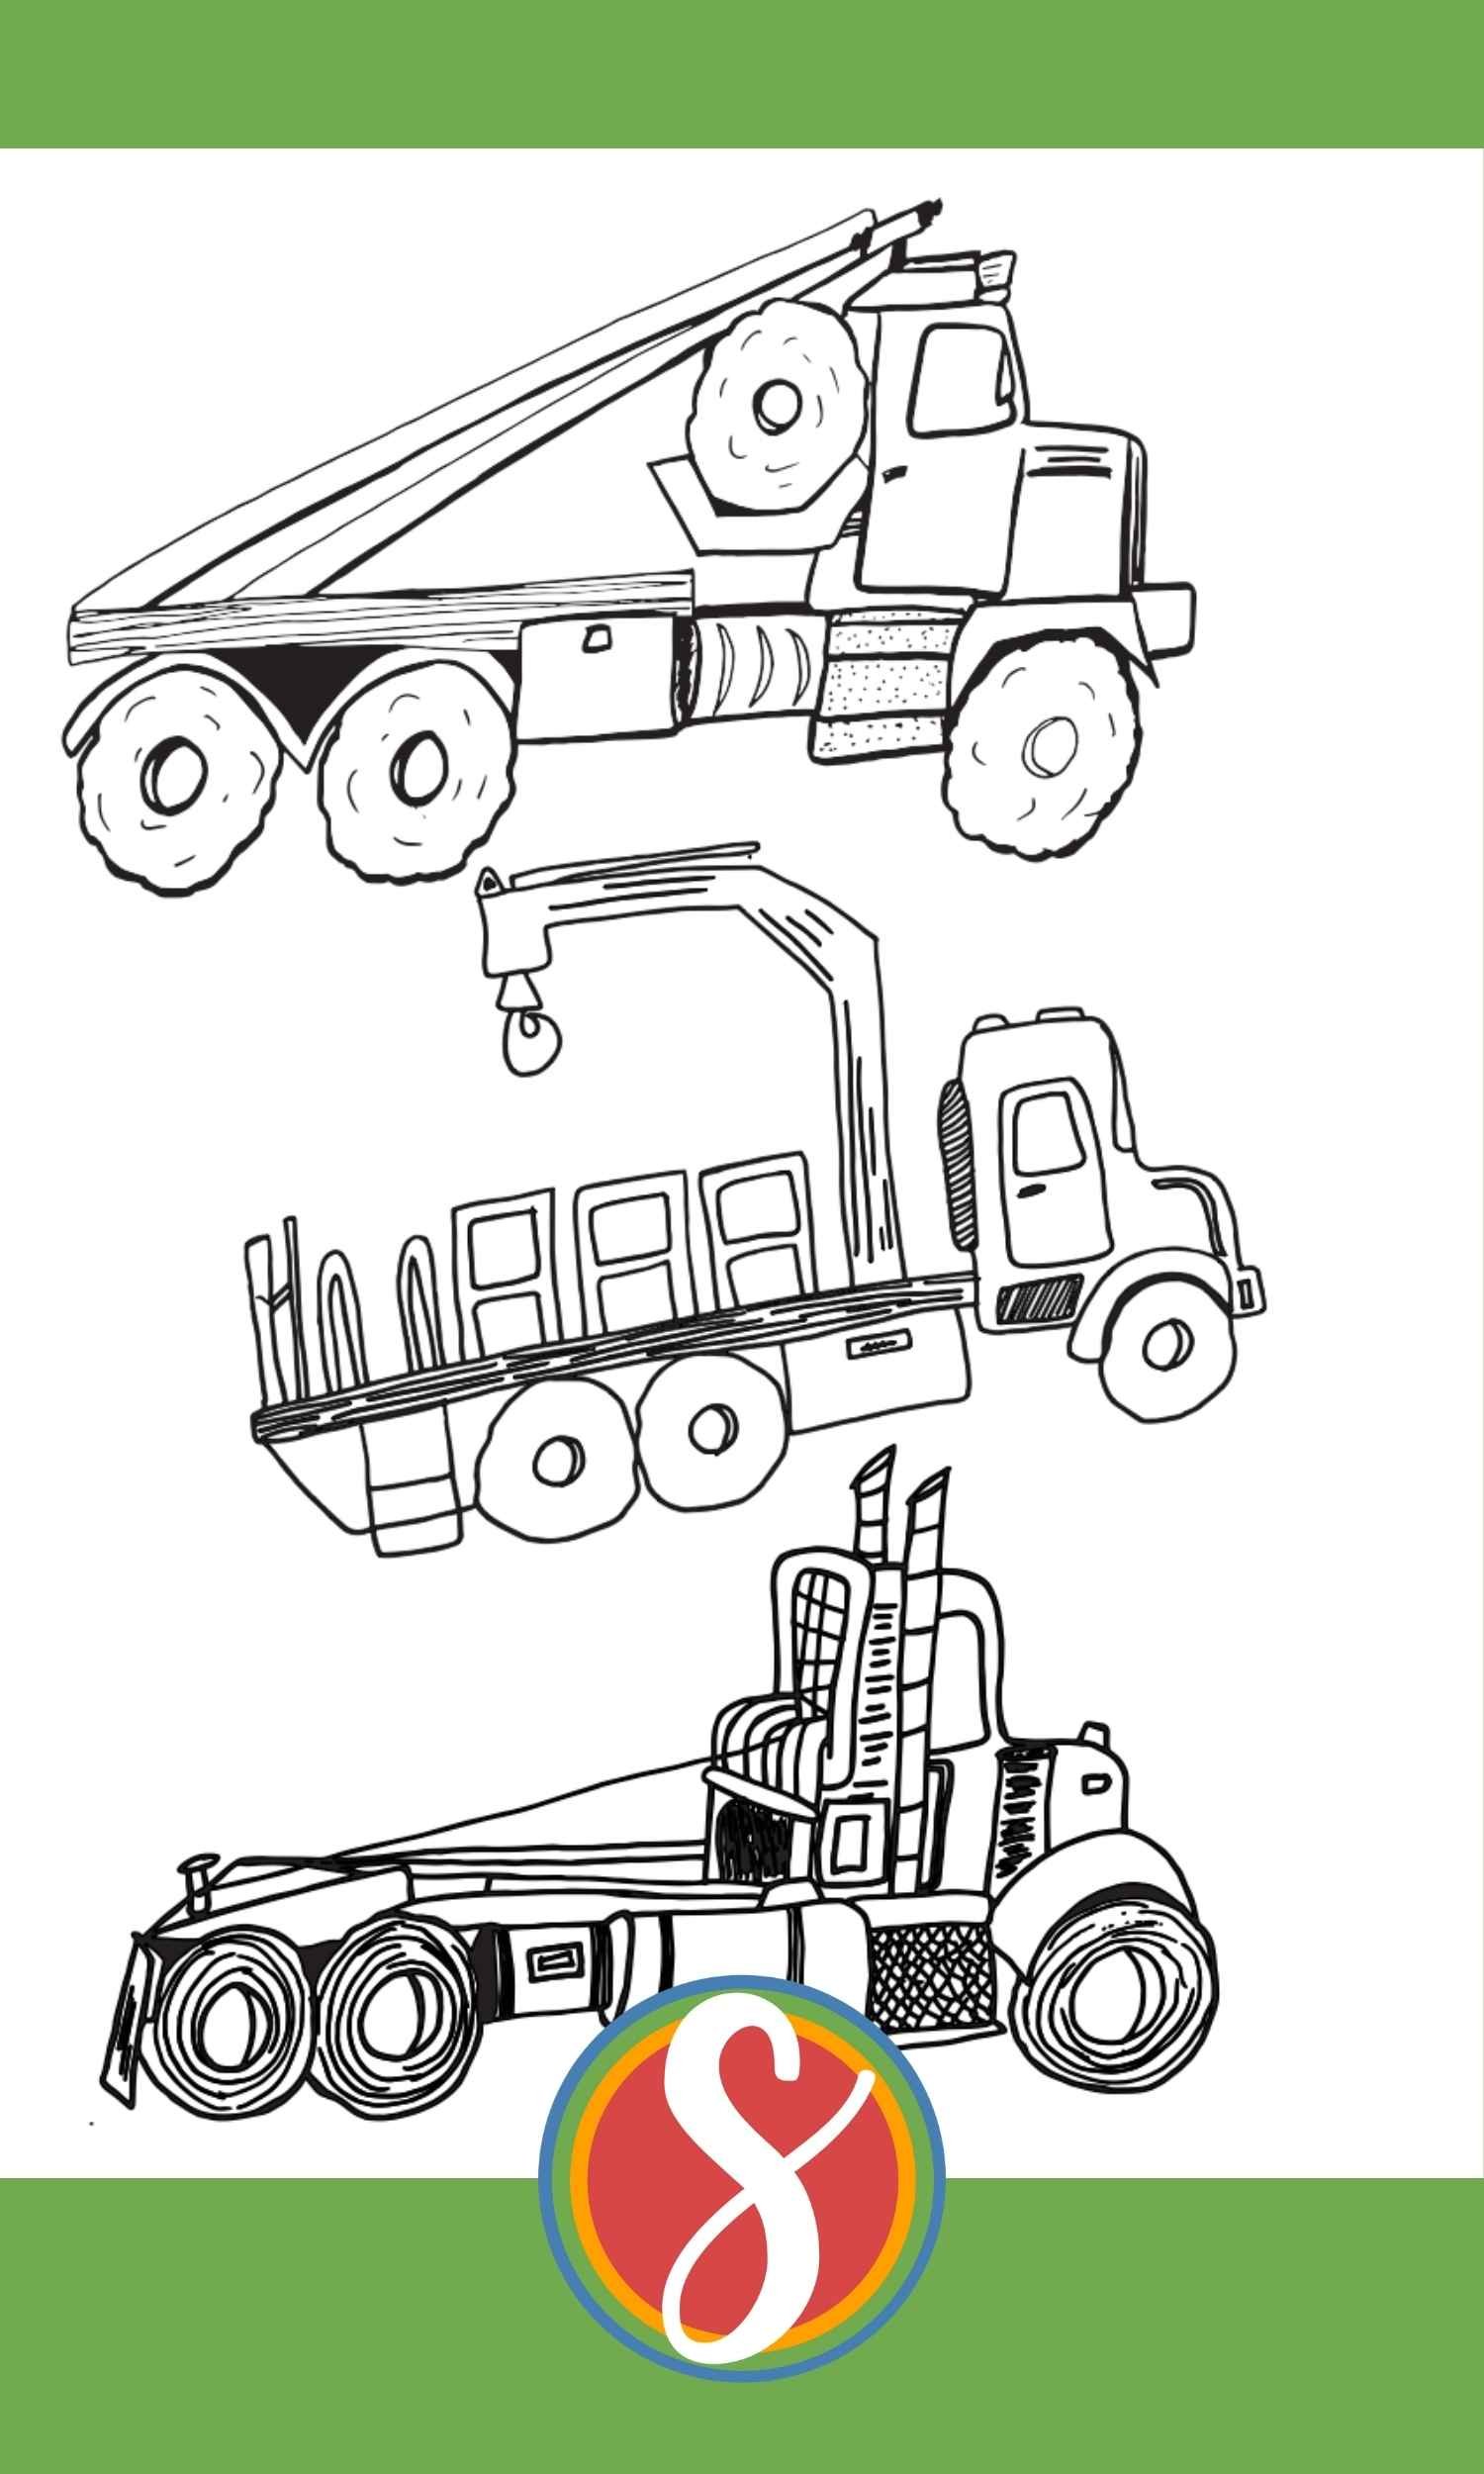 3 simple trucks drawn on the coloring page